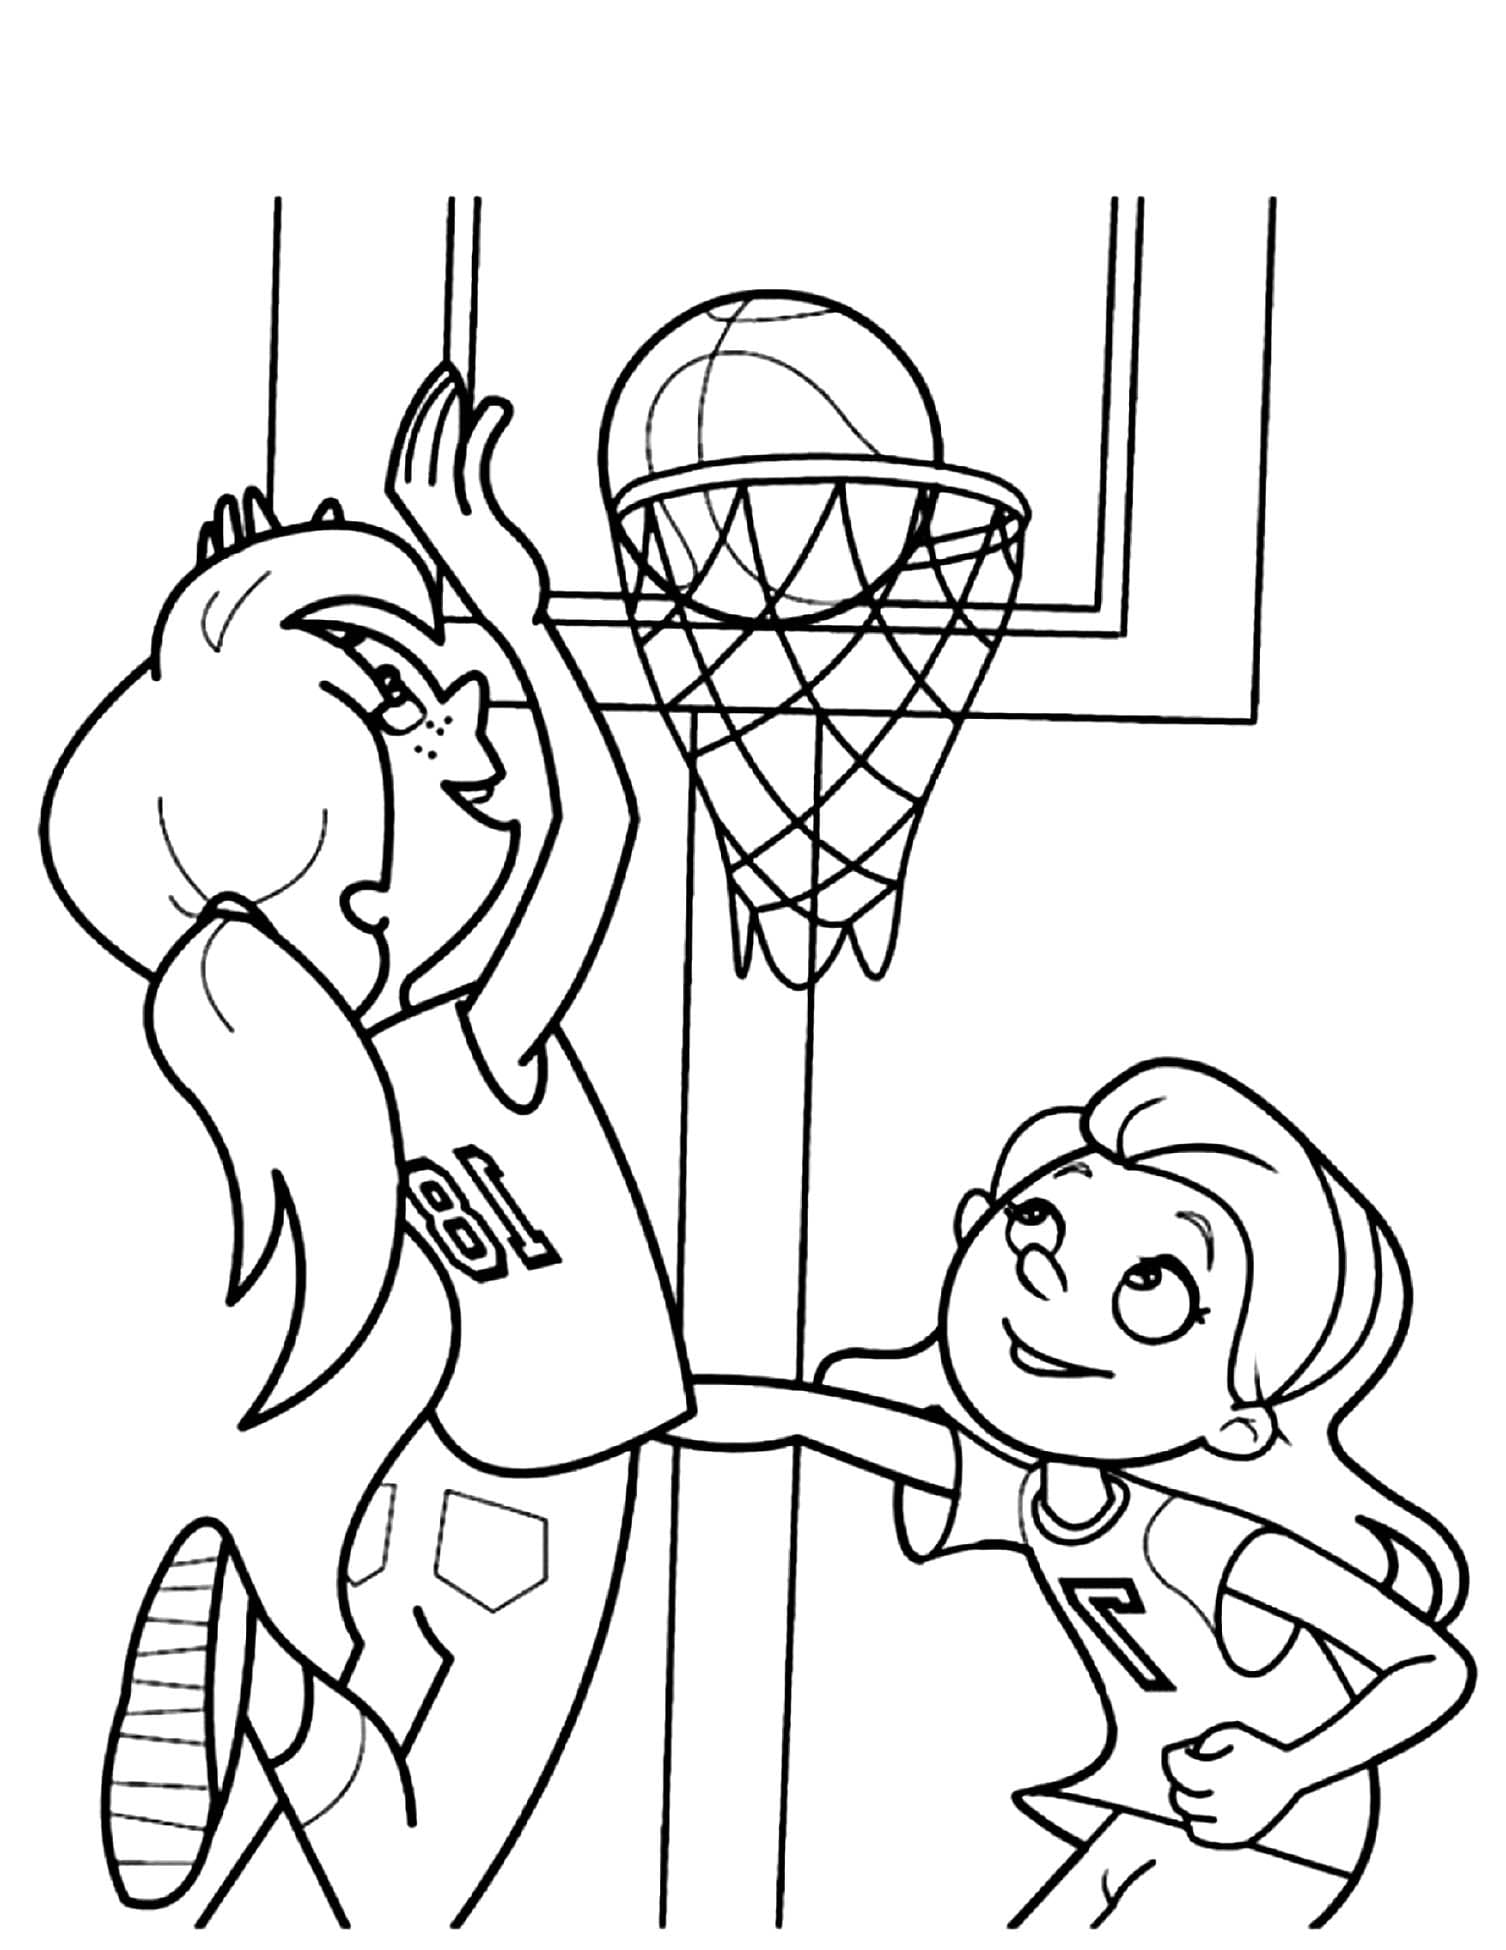 Basketball For Children Coloring Page